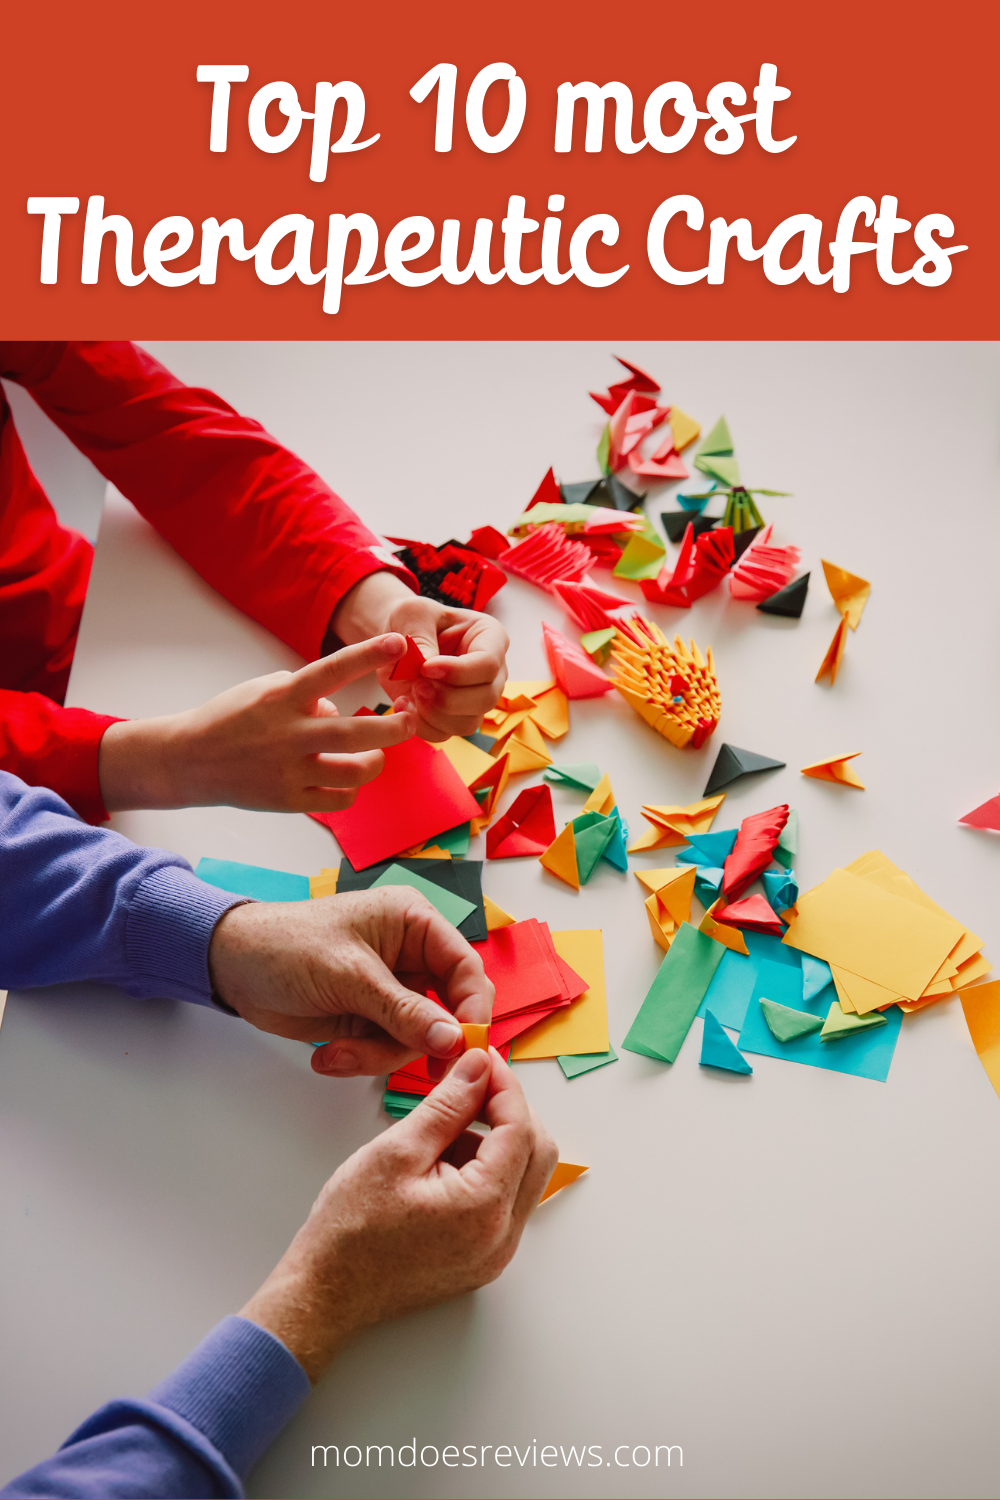 Revealed: Top 10 most therapeutic crafts